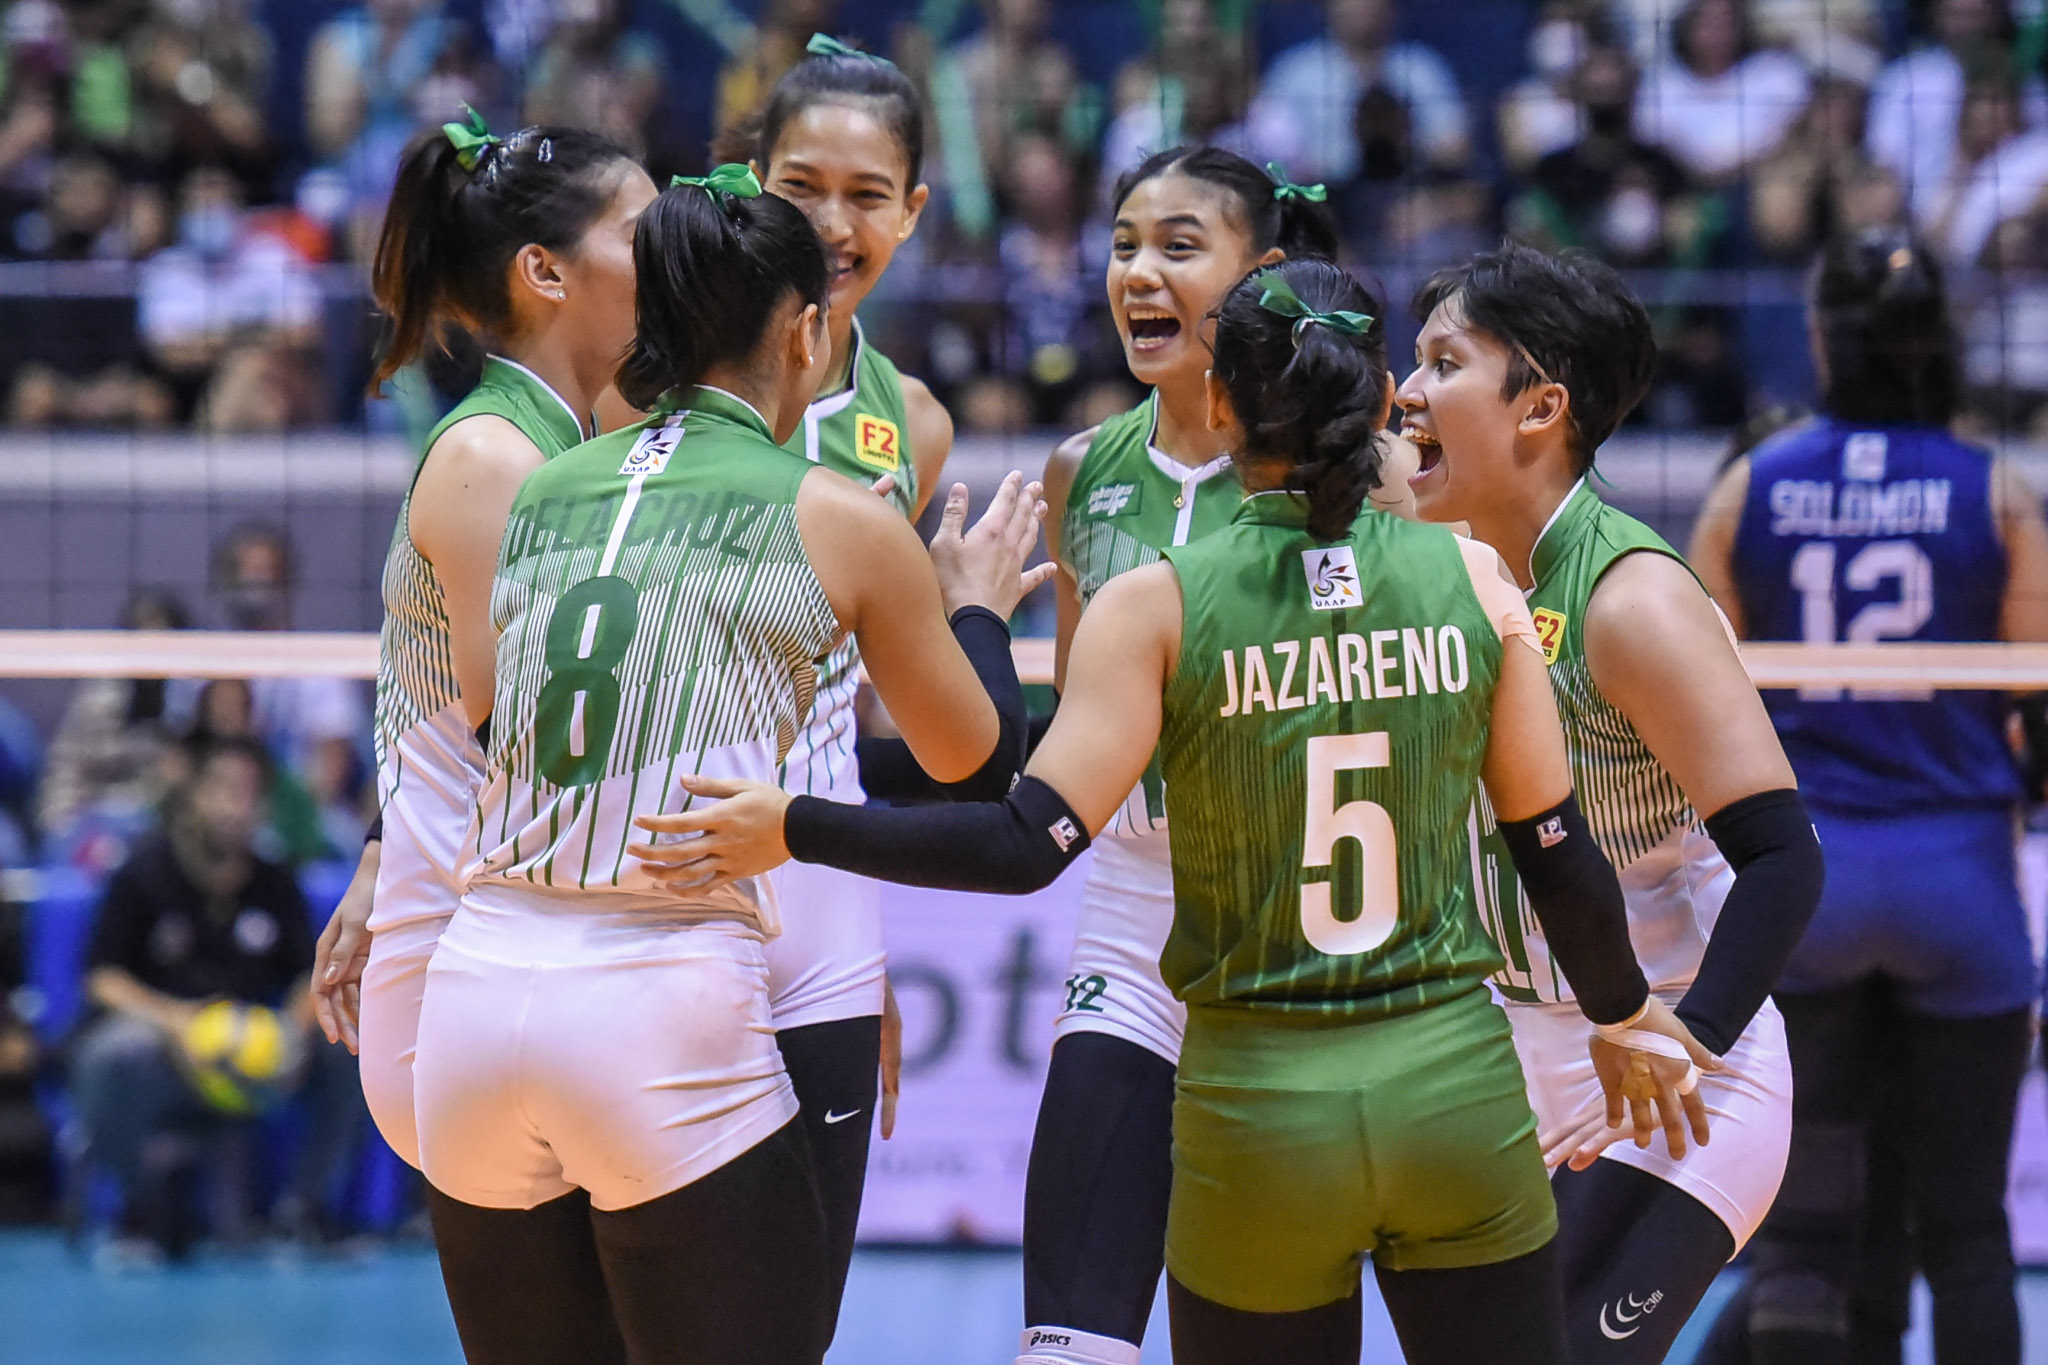 La Salle moves on the cusp of UAAP women's volleyball title,